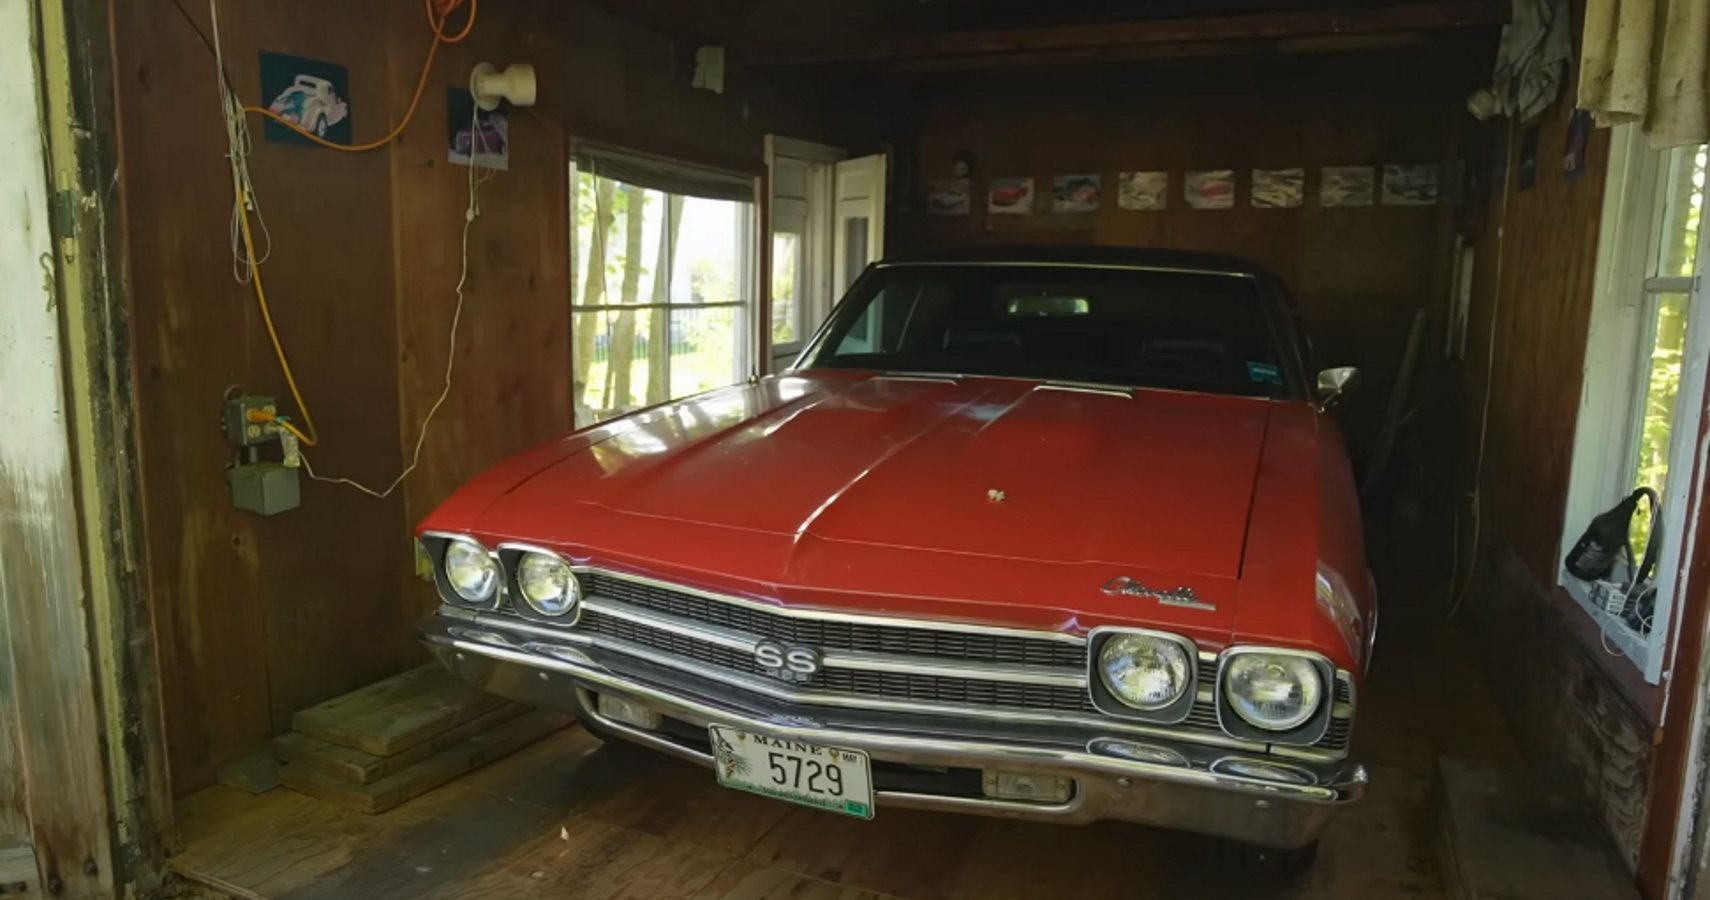 Barn Find Hunter Hits The American Muscle Jackpot In Tiny Maine Village